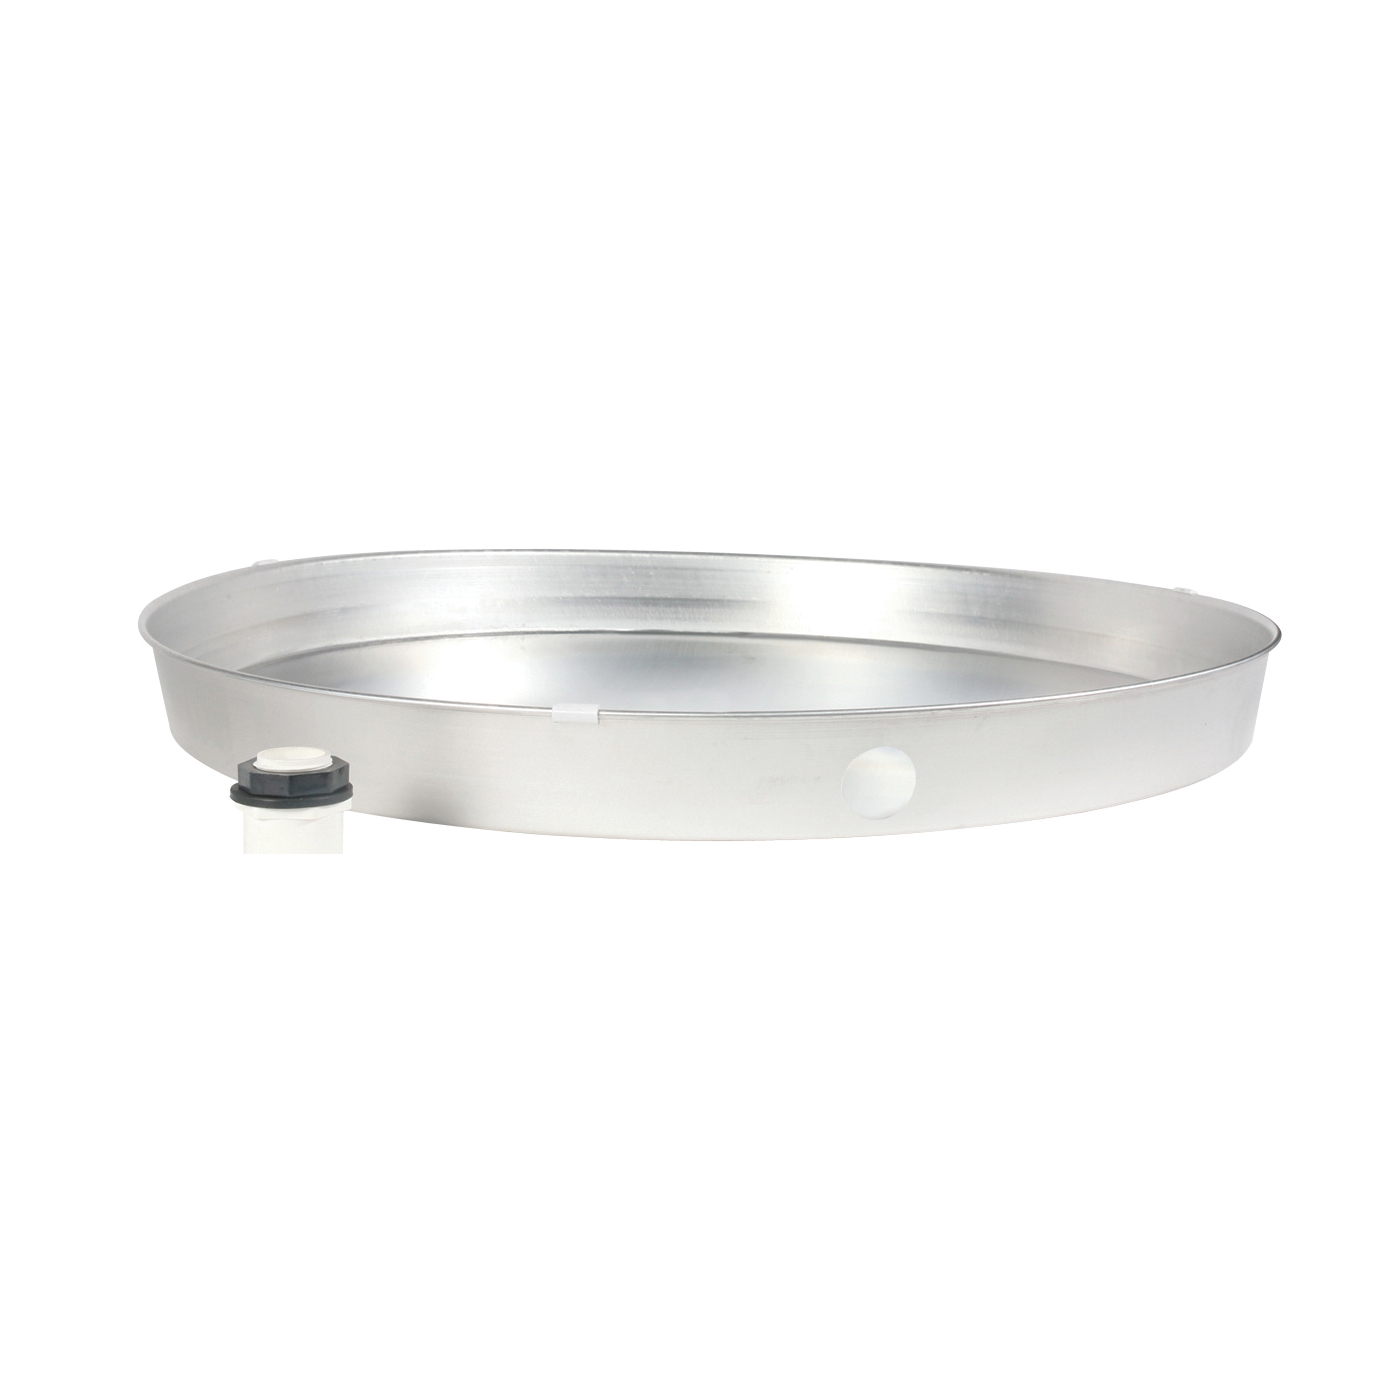 20830 Recyclable Drain Pan, Aluminum, For: Gas or Electric Water Heaters